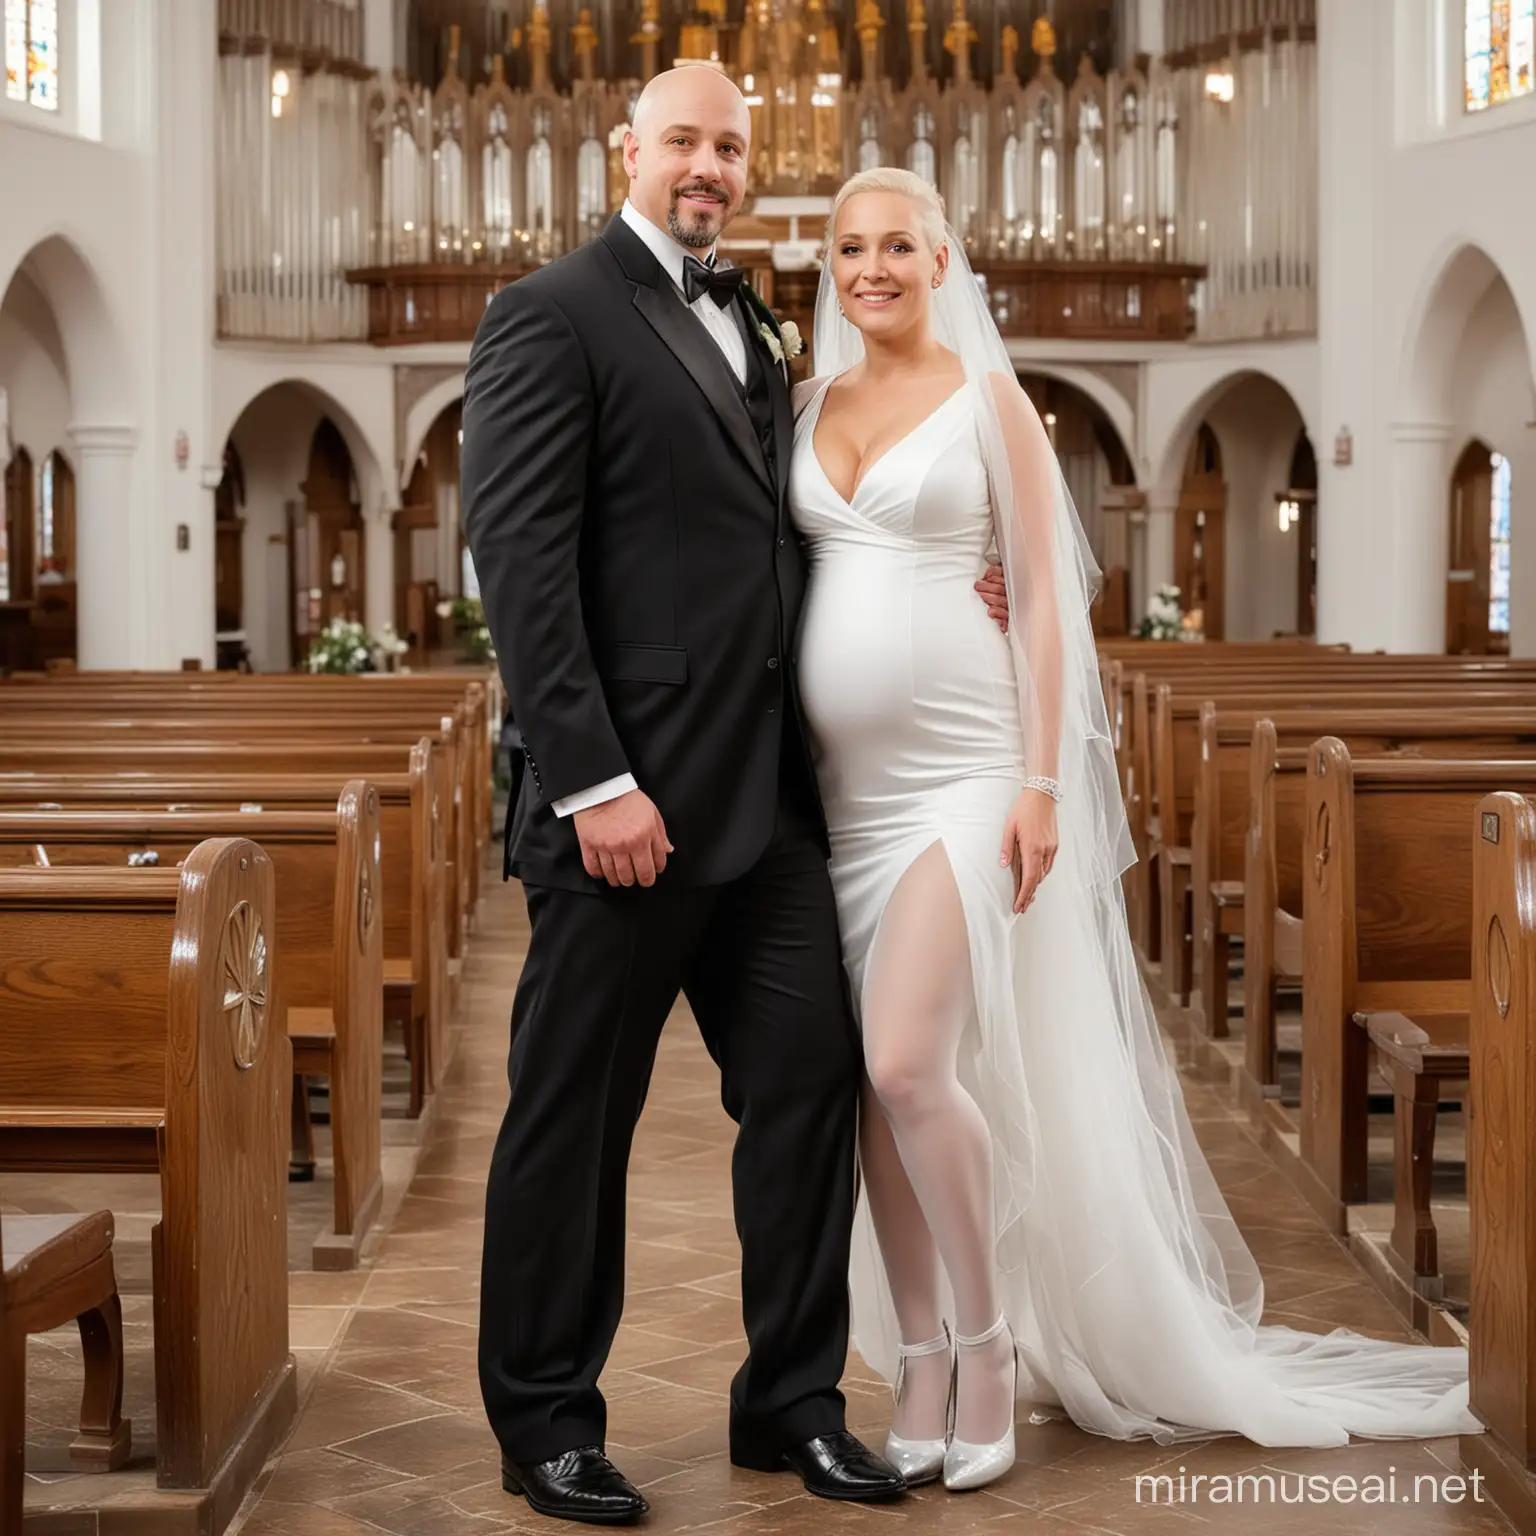 Mature Bride and Groom Exchanging Vows in Church